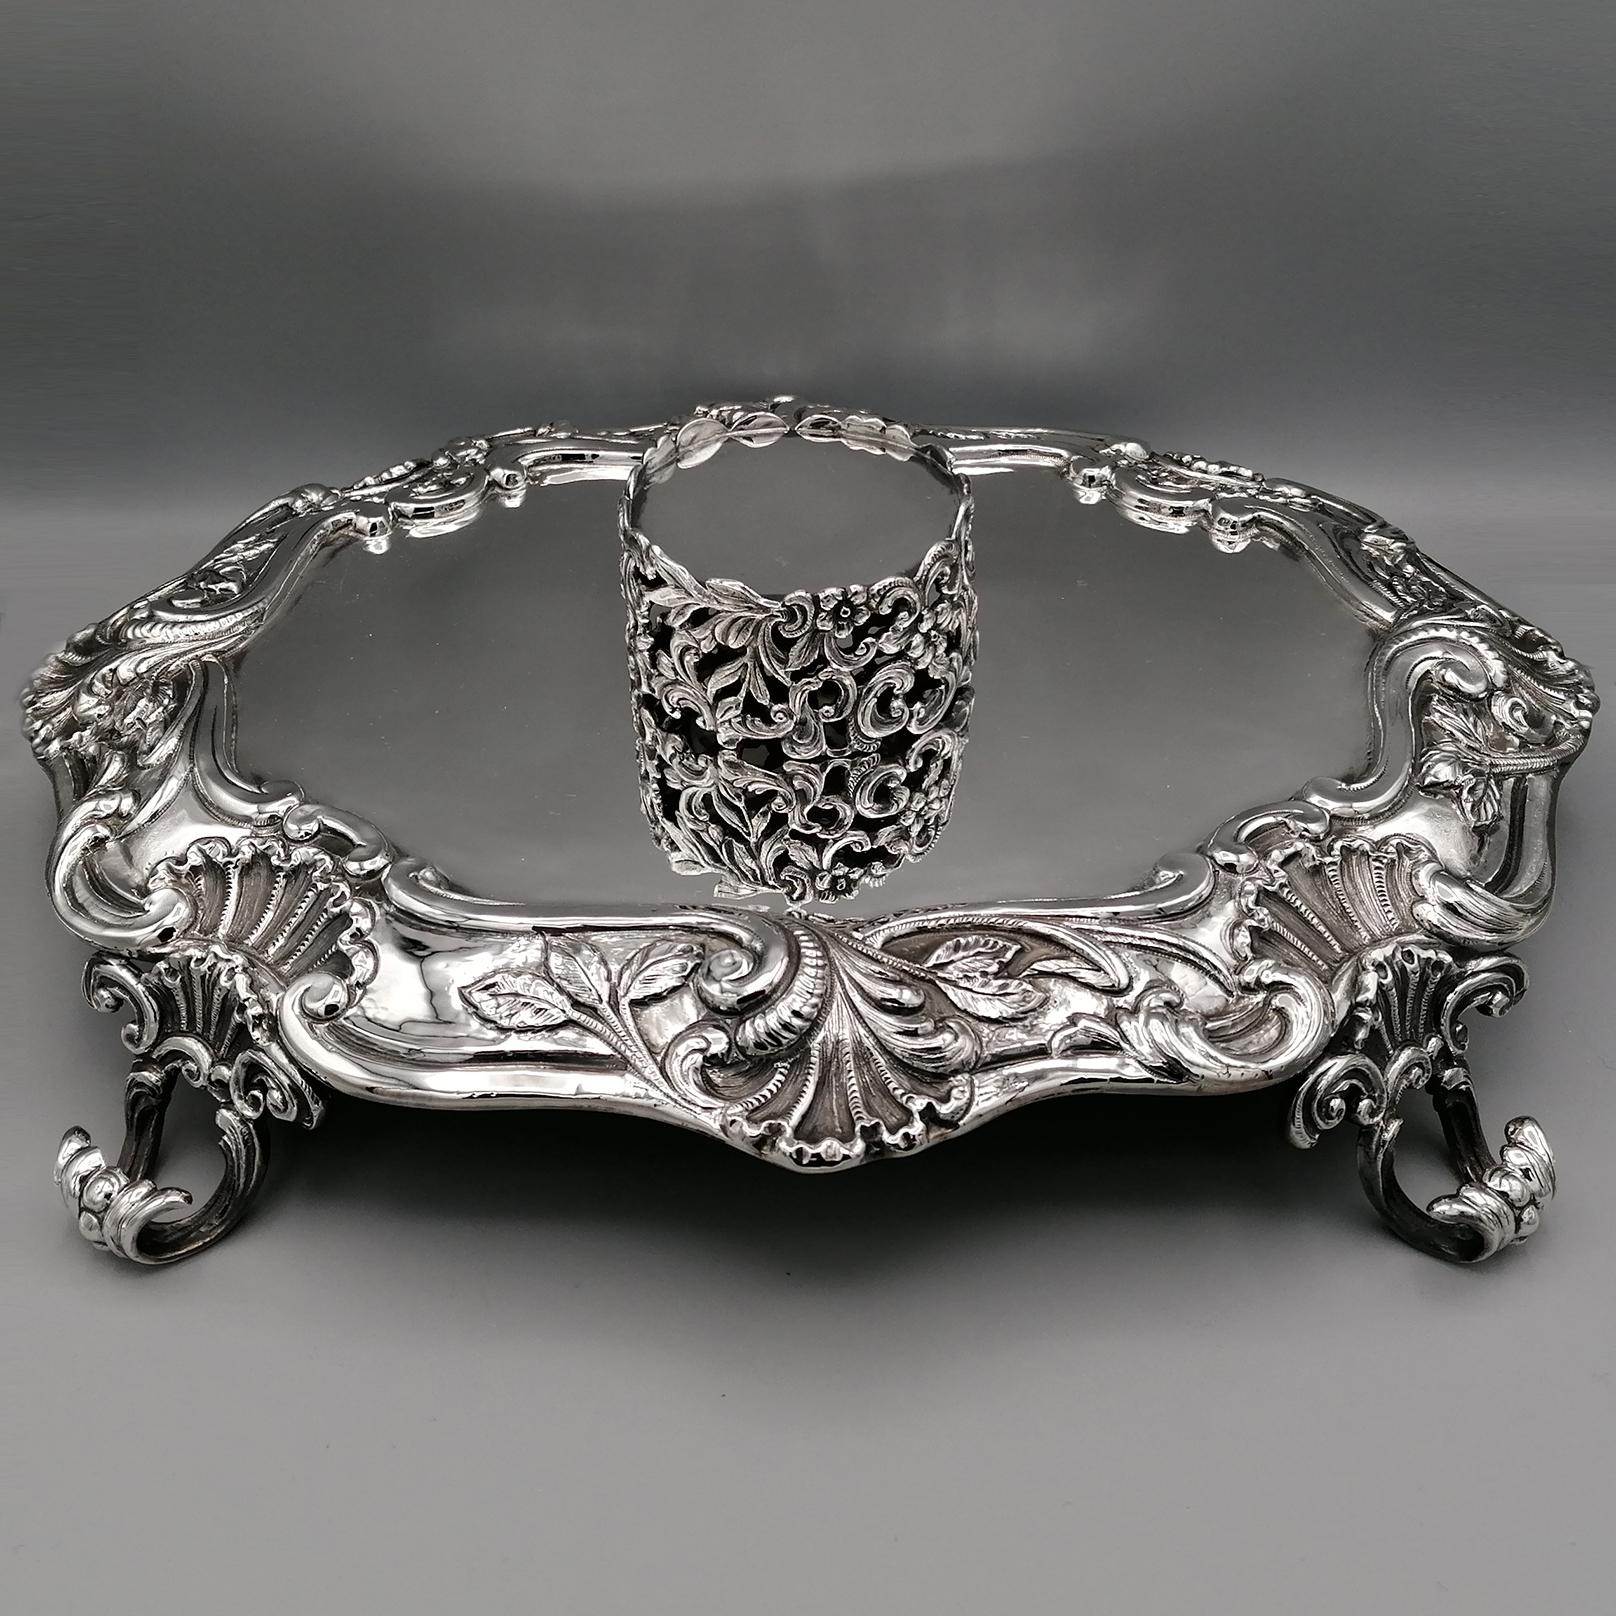 20th Century Italian Sterling Silver Inkstand, baroque revival  For Sale 5